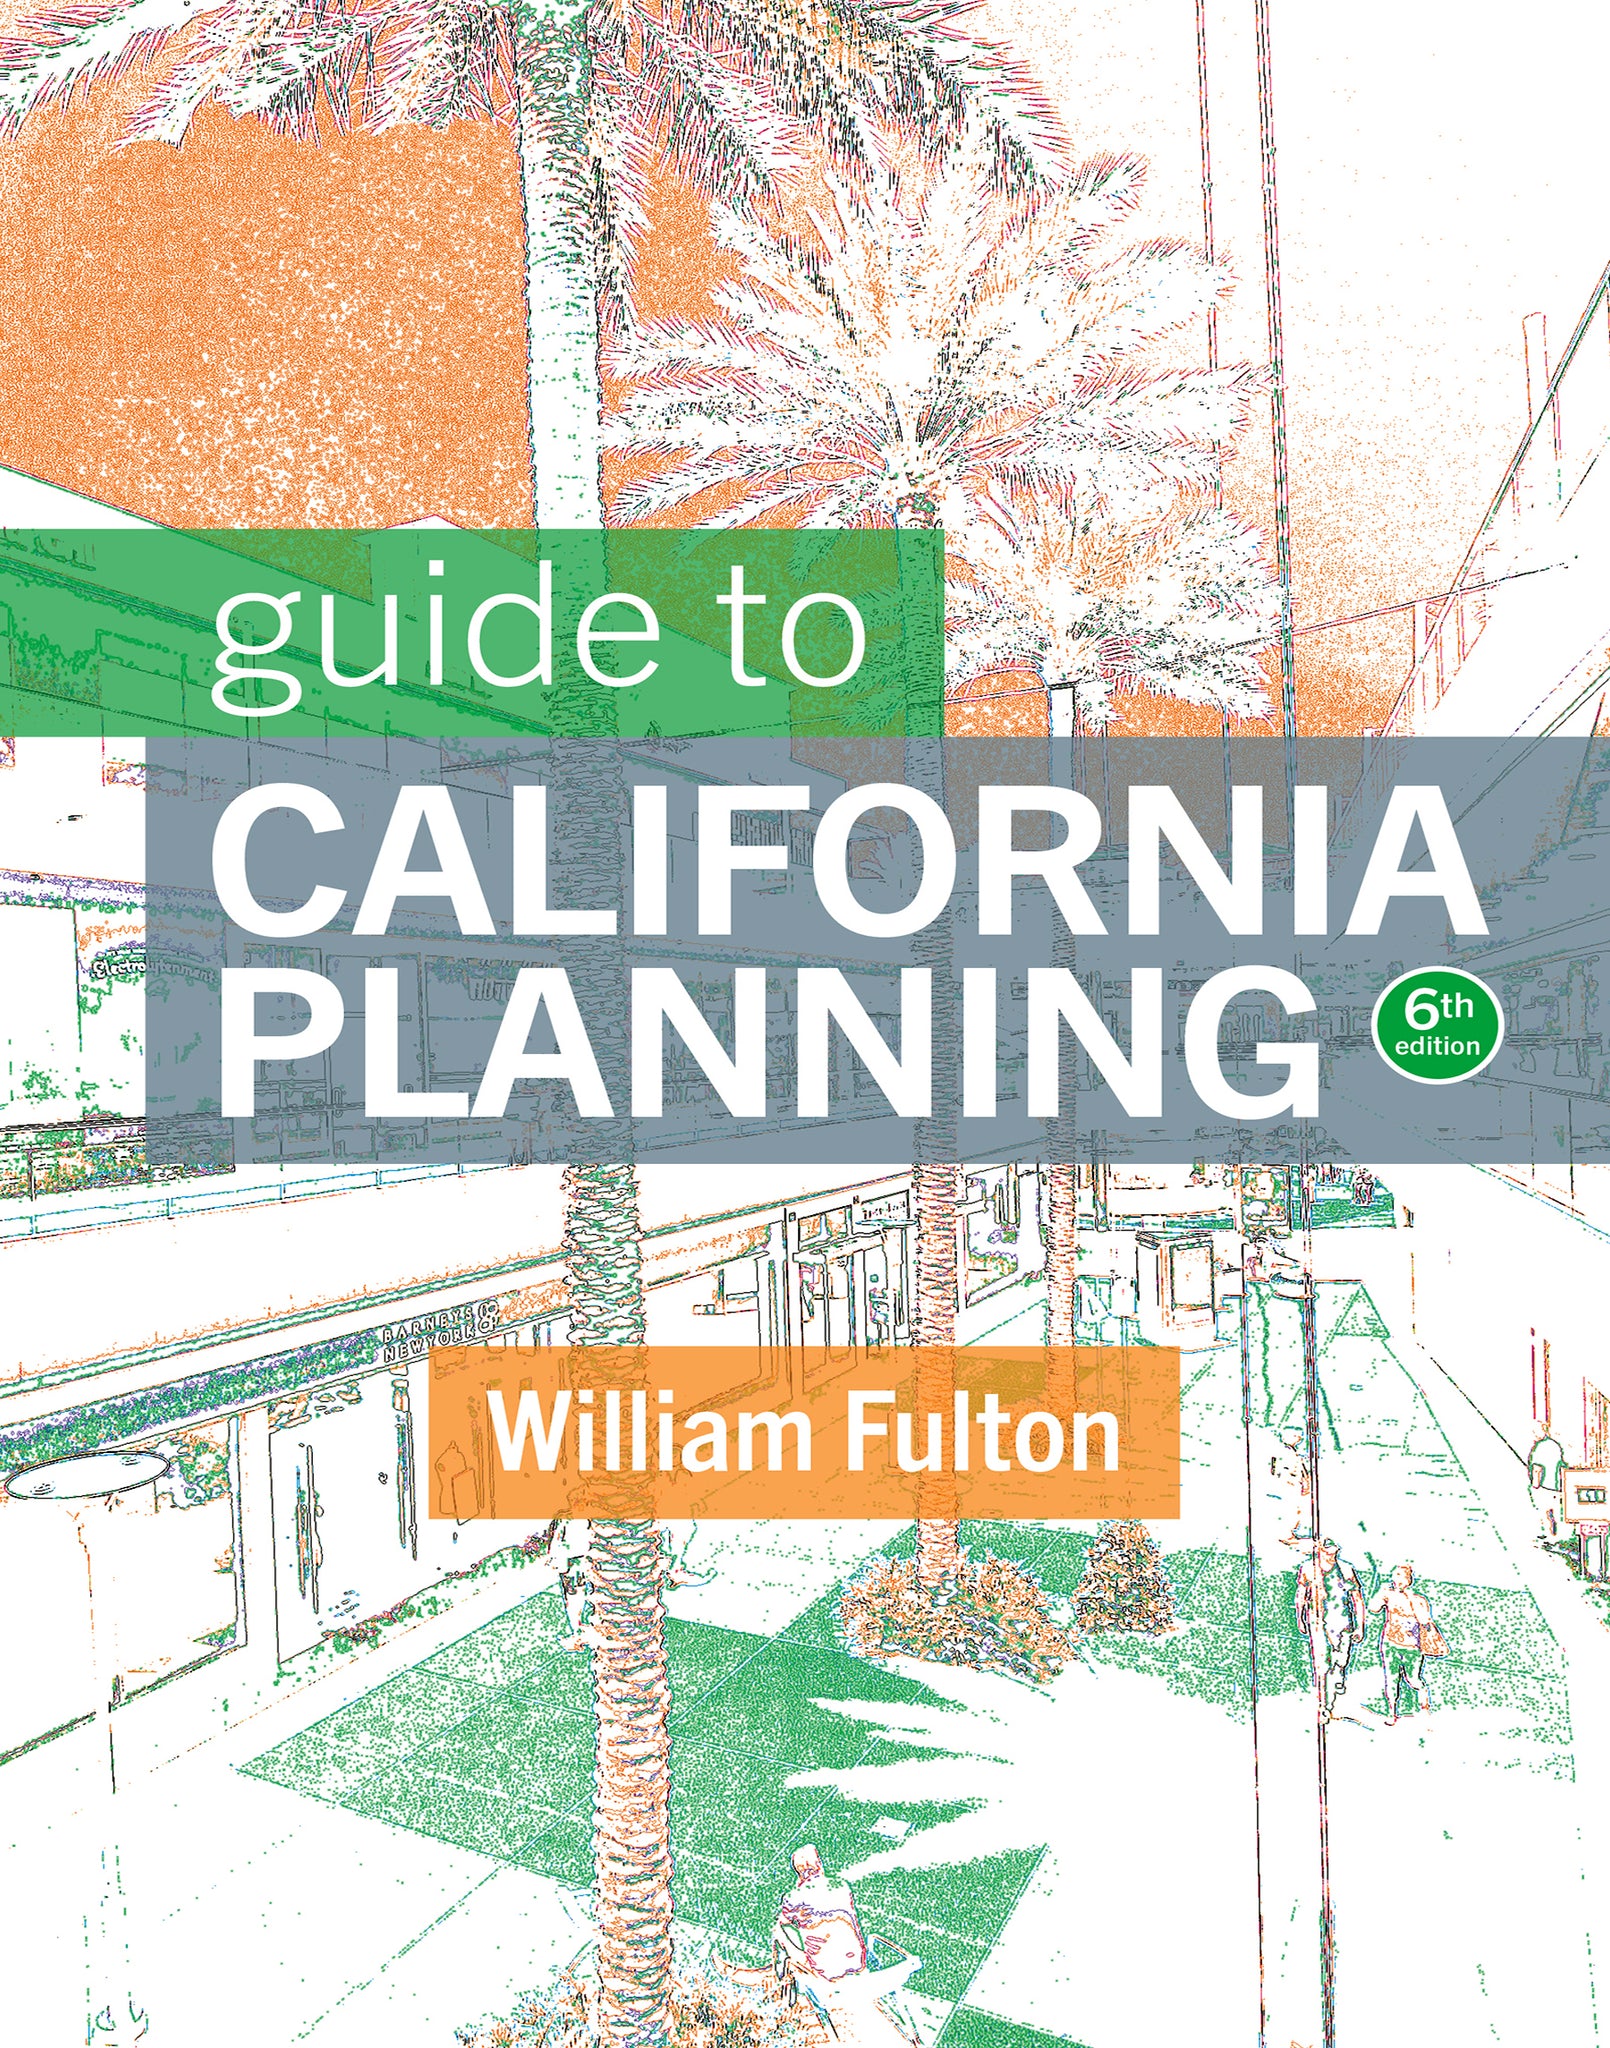 Guide to California Planning 6th Edition